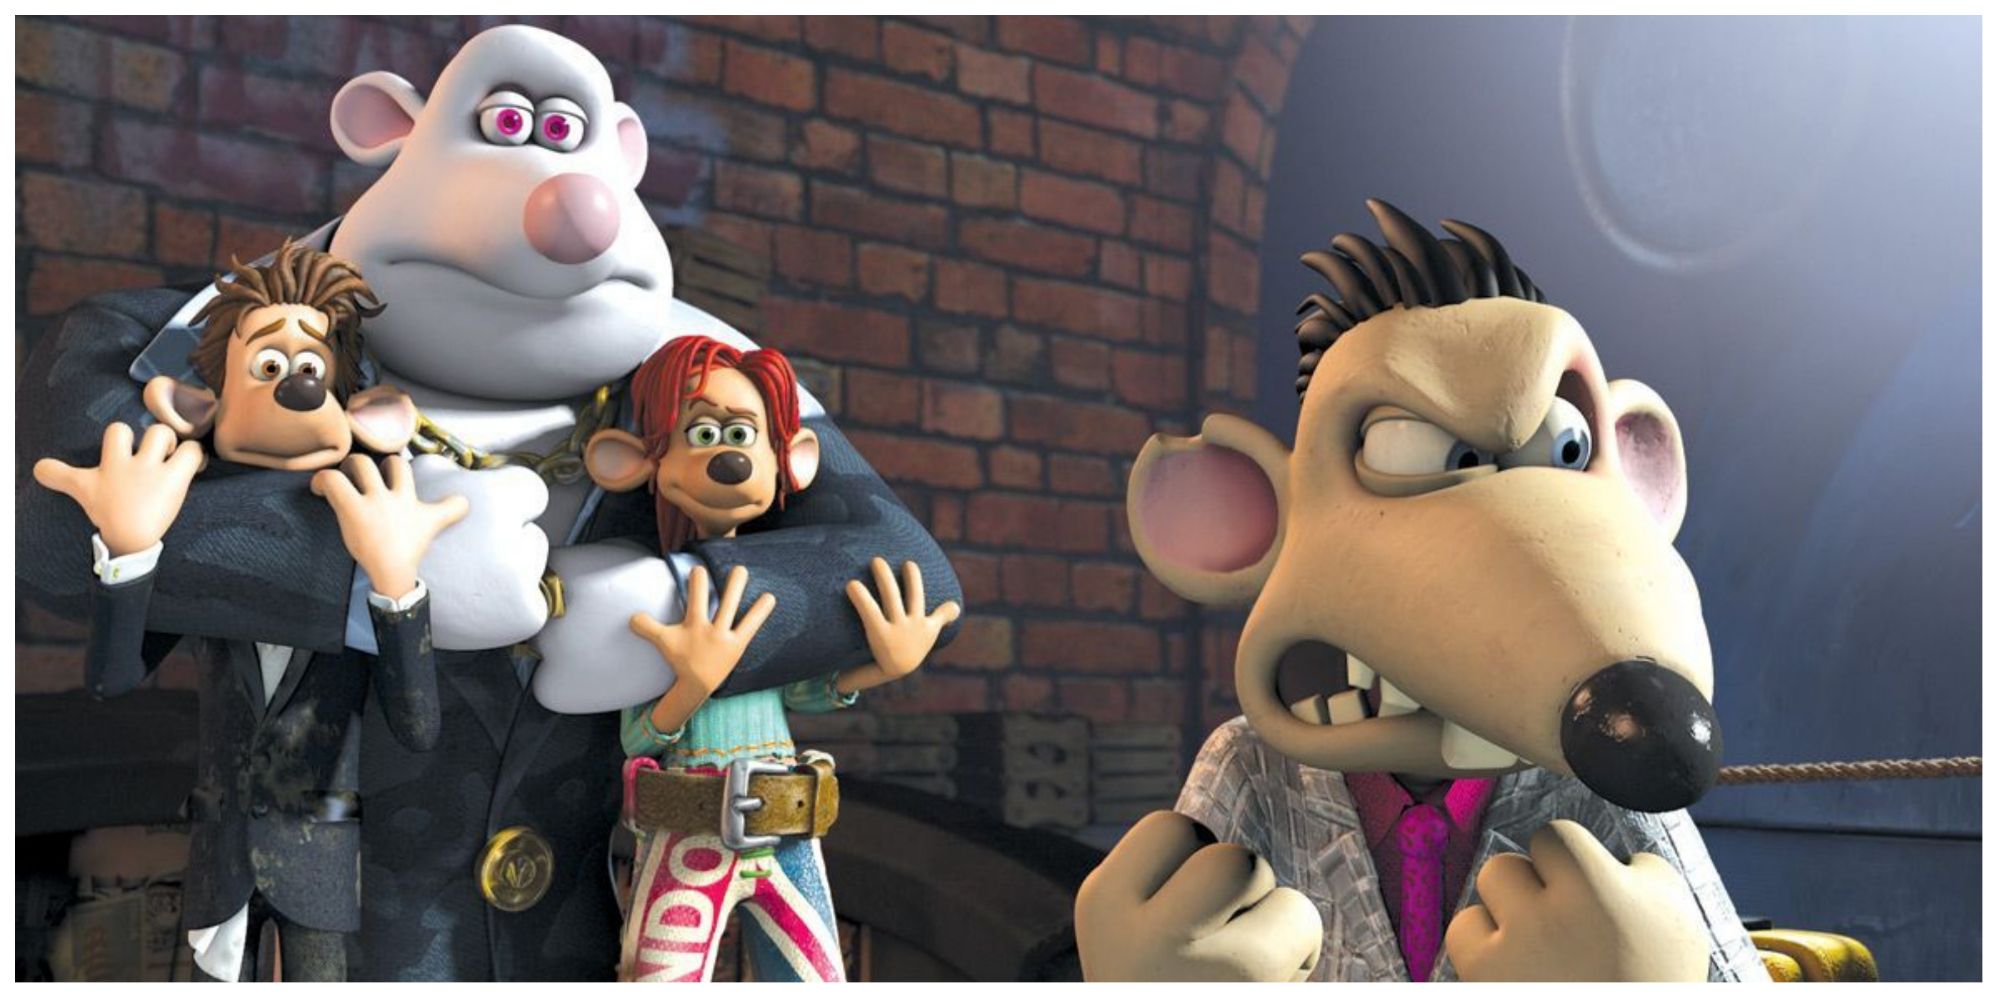 Roddy and Rita in DreamWorks' Flushed Away.